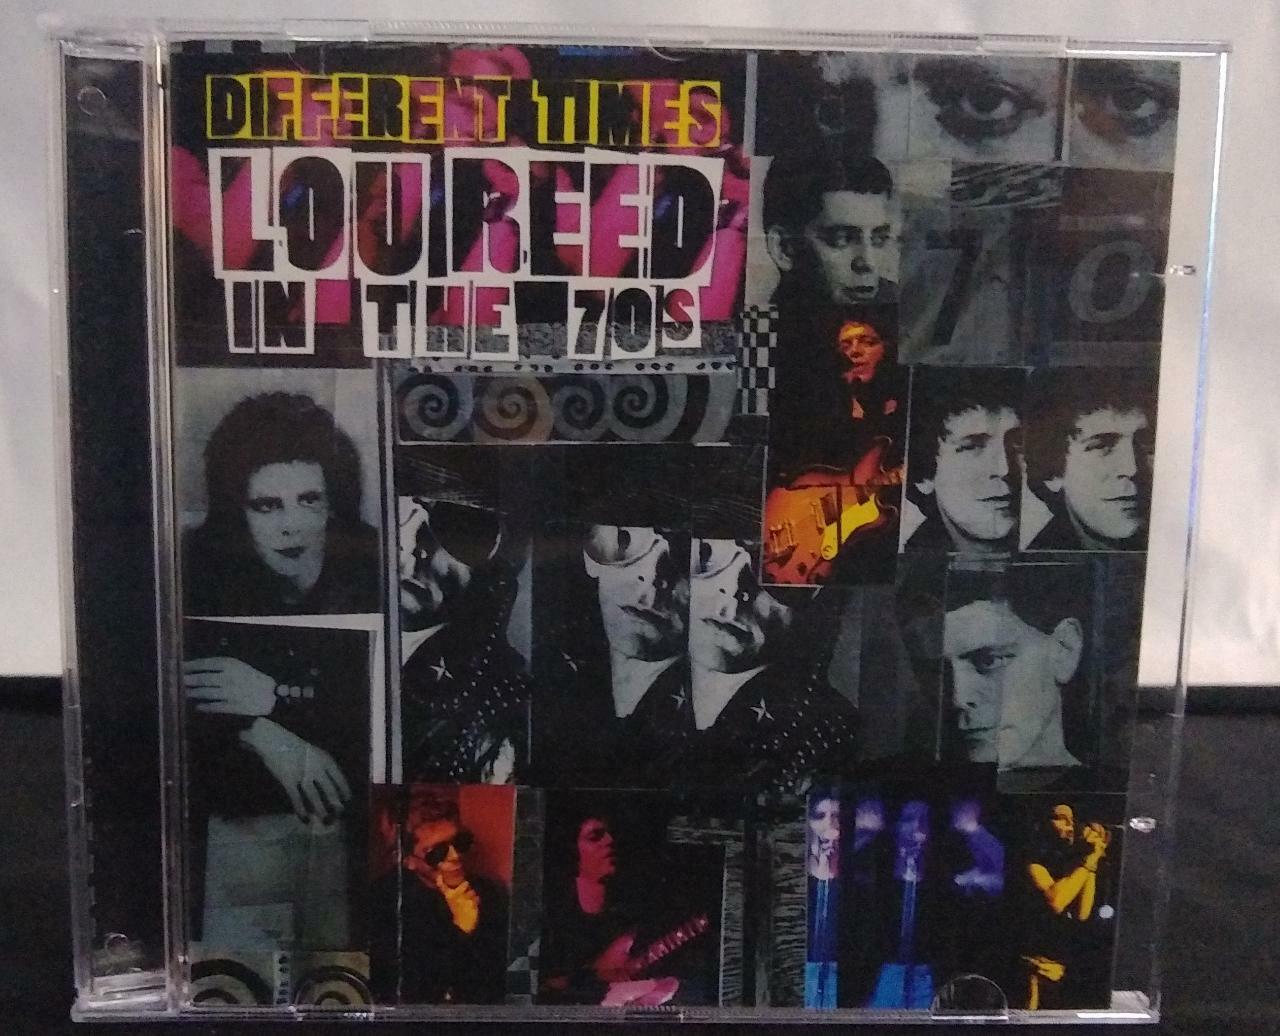 CD - Lou Reed - Different Times Lou Reed in the 70s